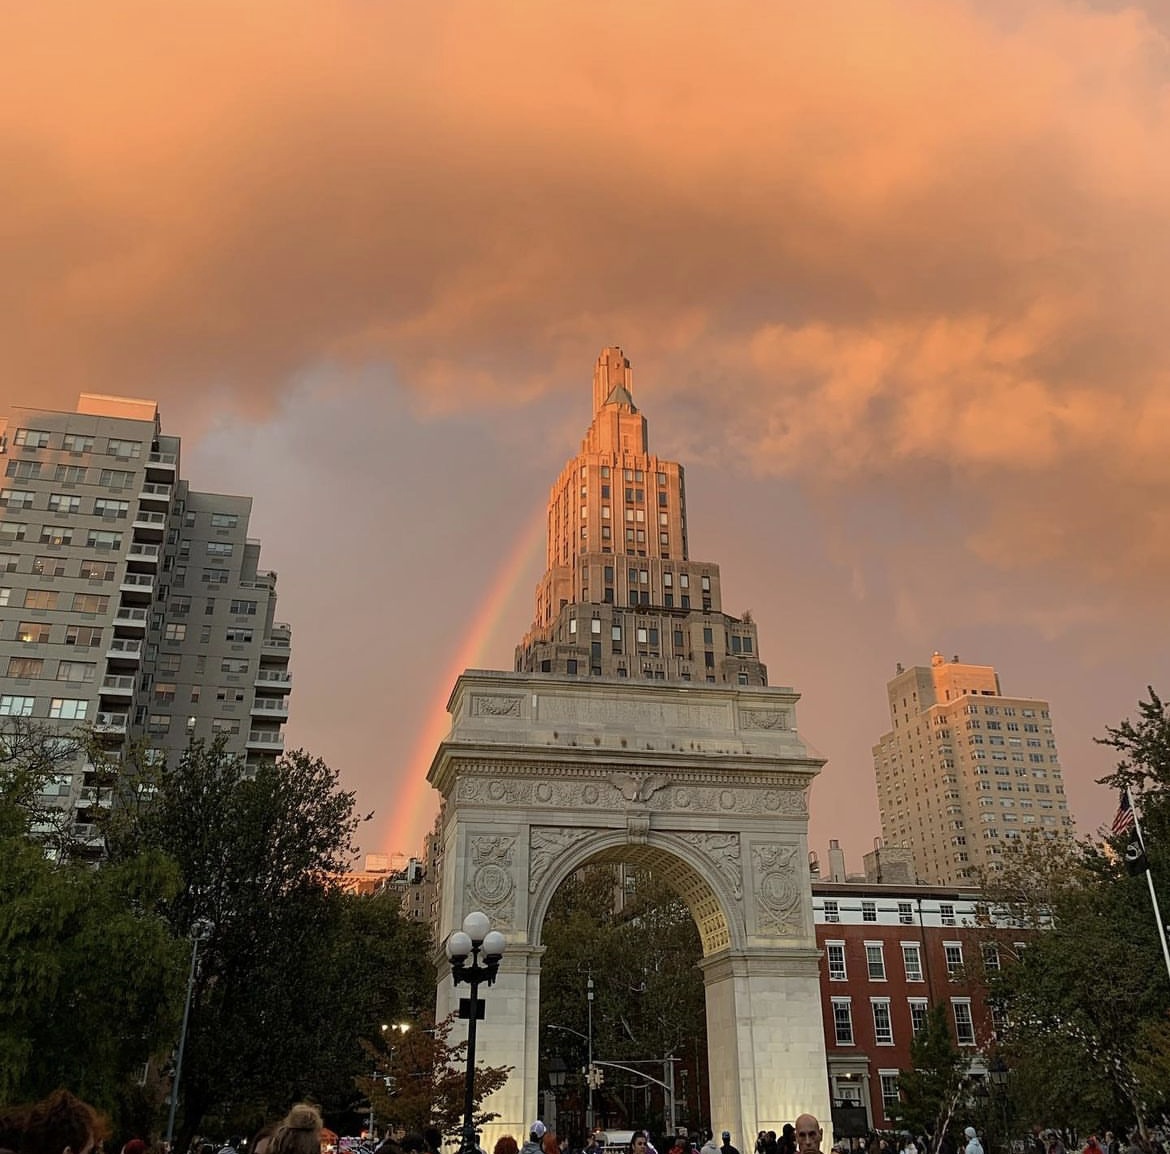 As the sun is setting, there is a rainbow over the Washington Square Arch in New York City.